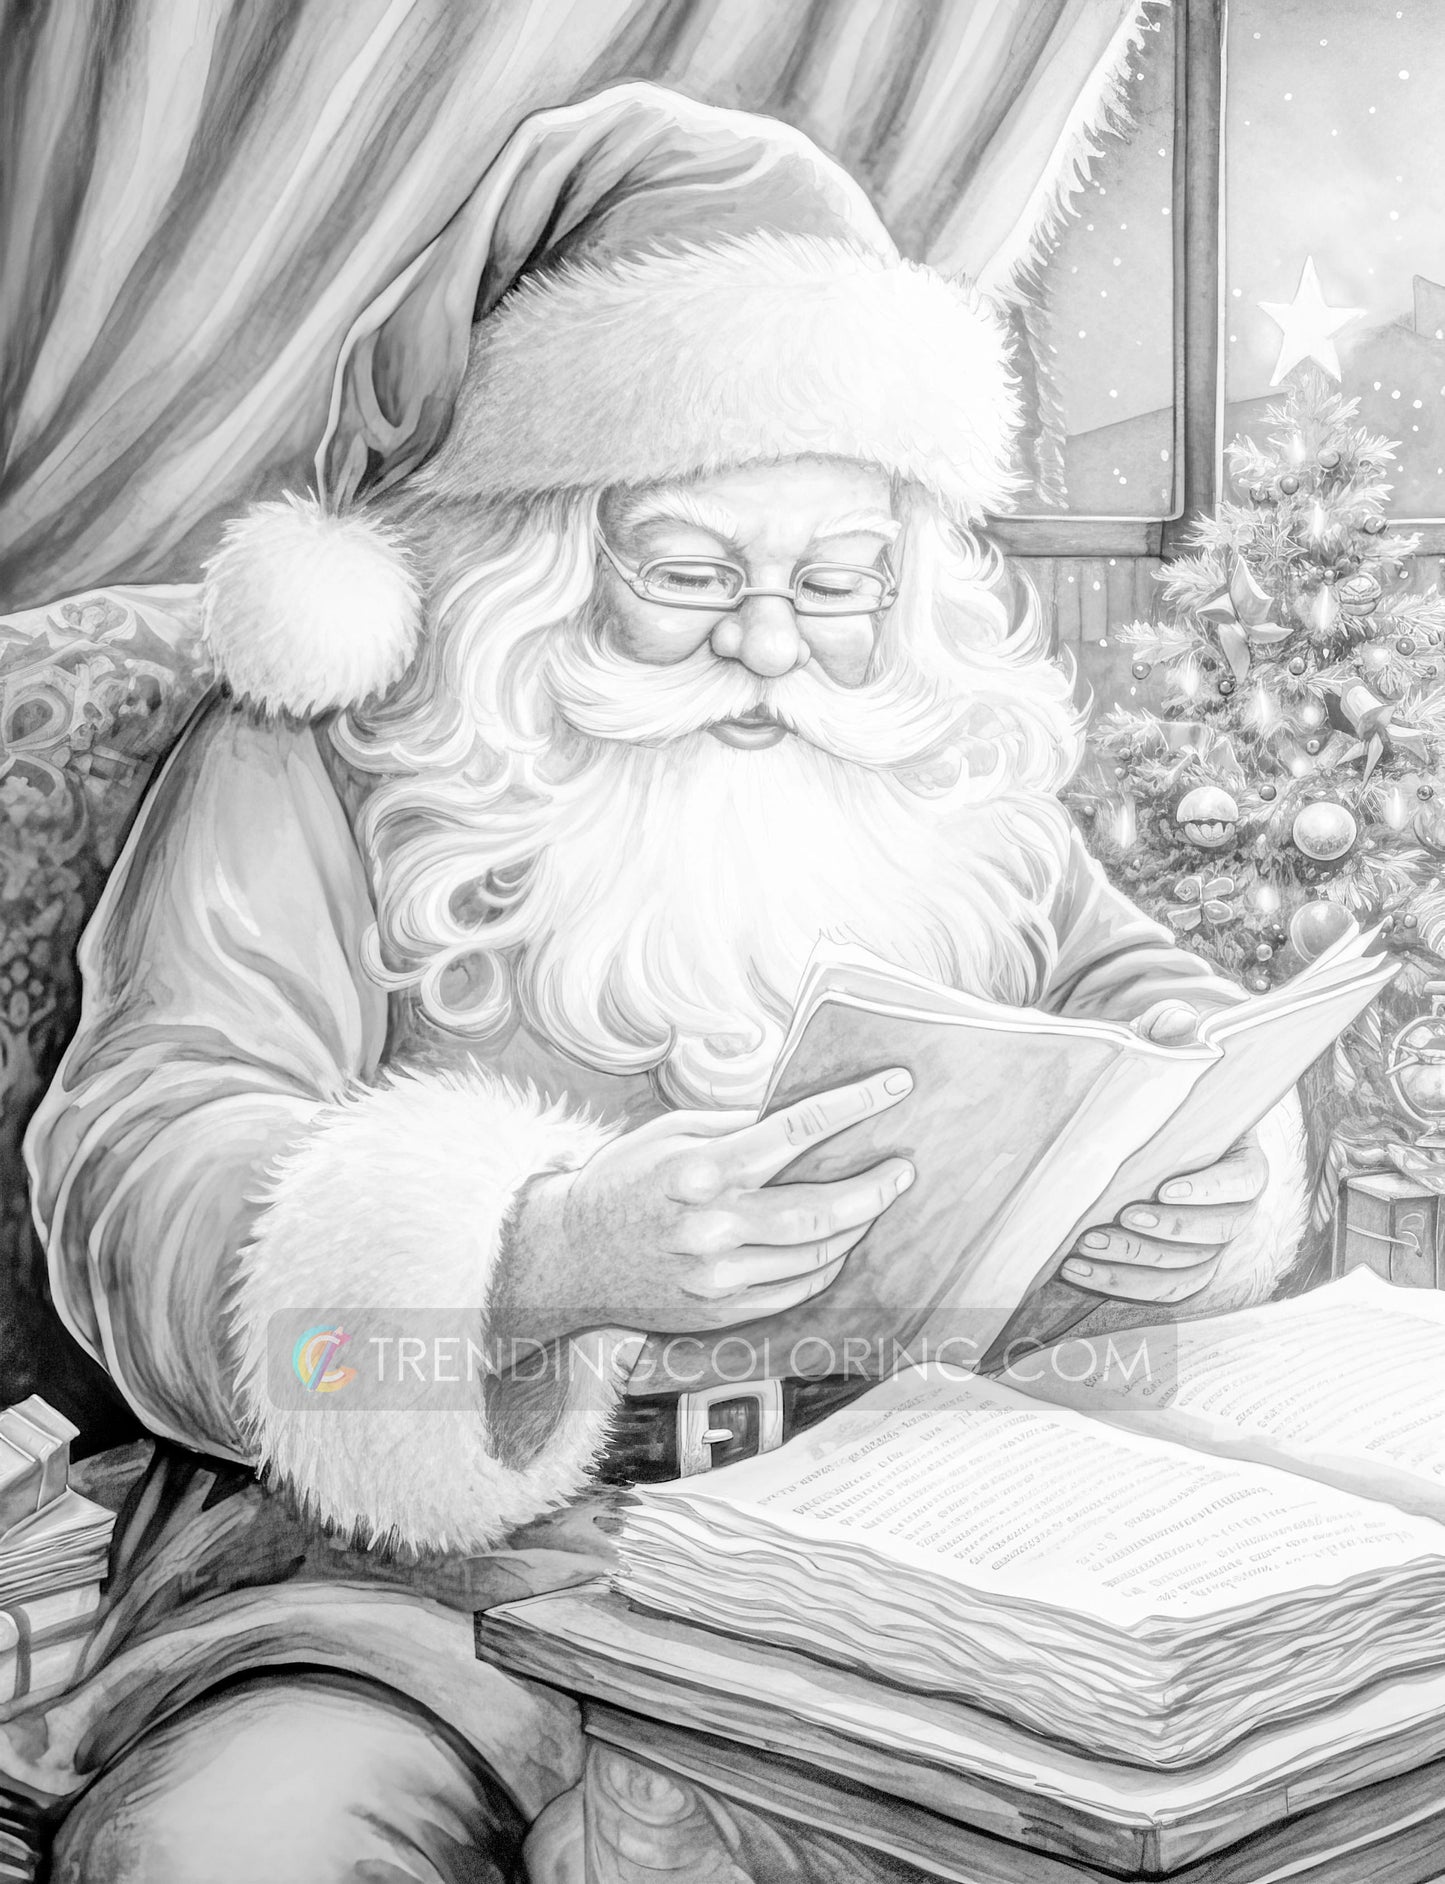 Free Christmas Coloring Pages - Instant Download Freepage